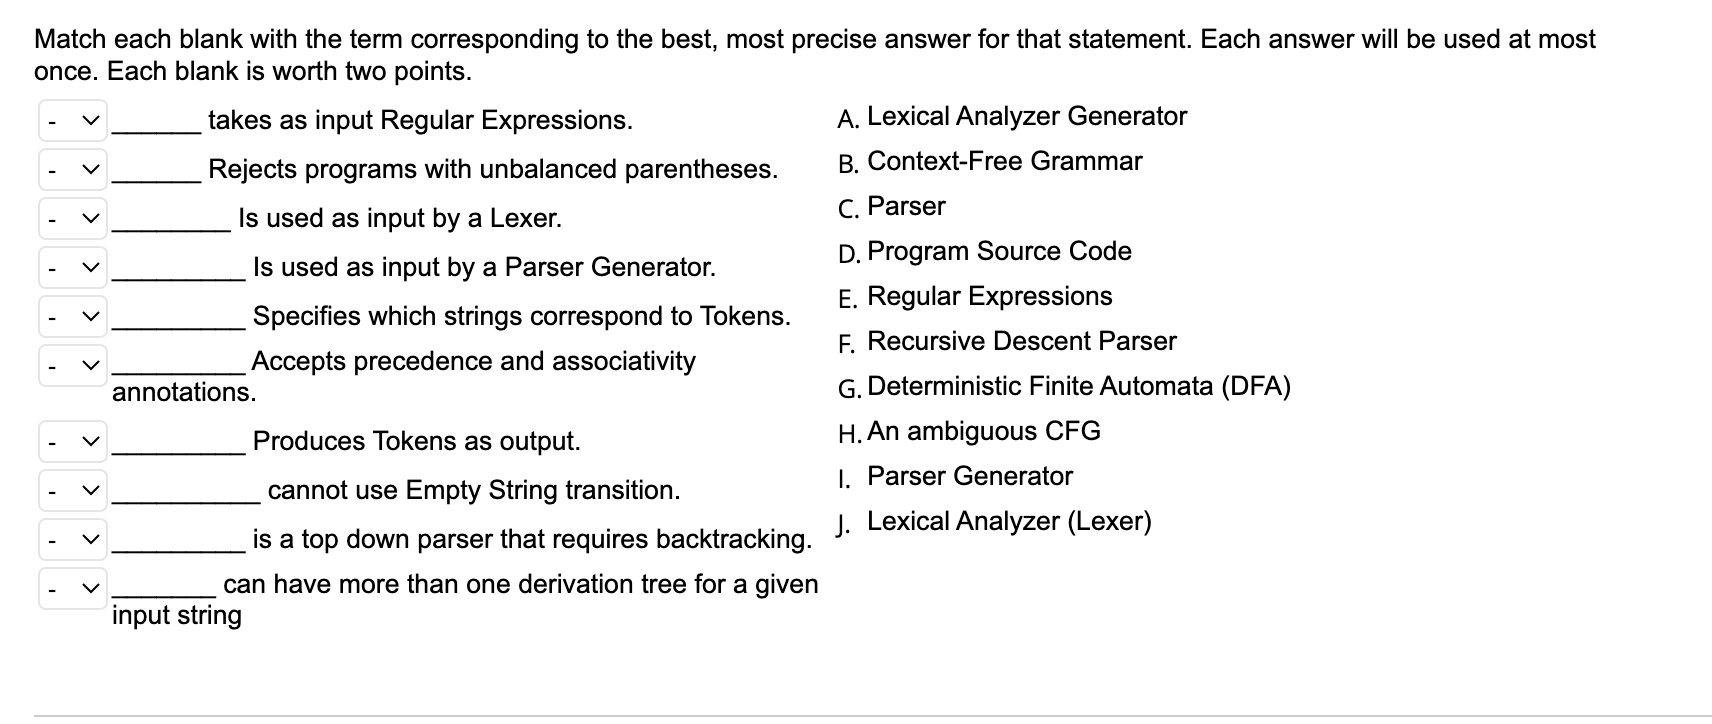 Match each blank with the term corresponding to the best, most precise answer for that statement. Each answer